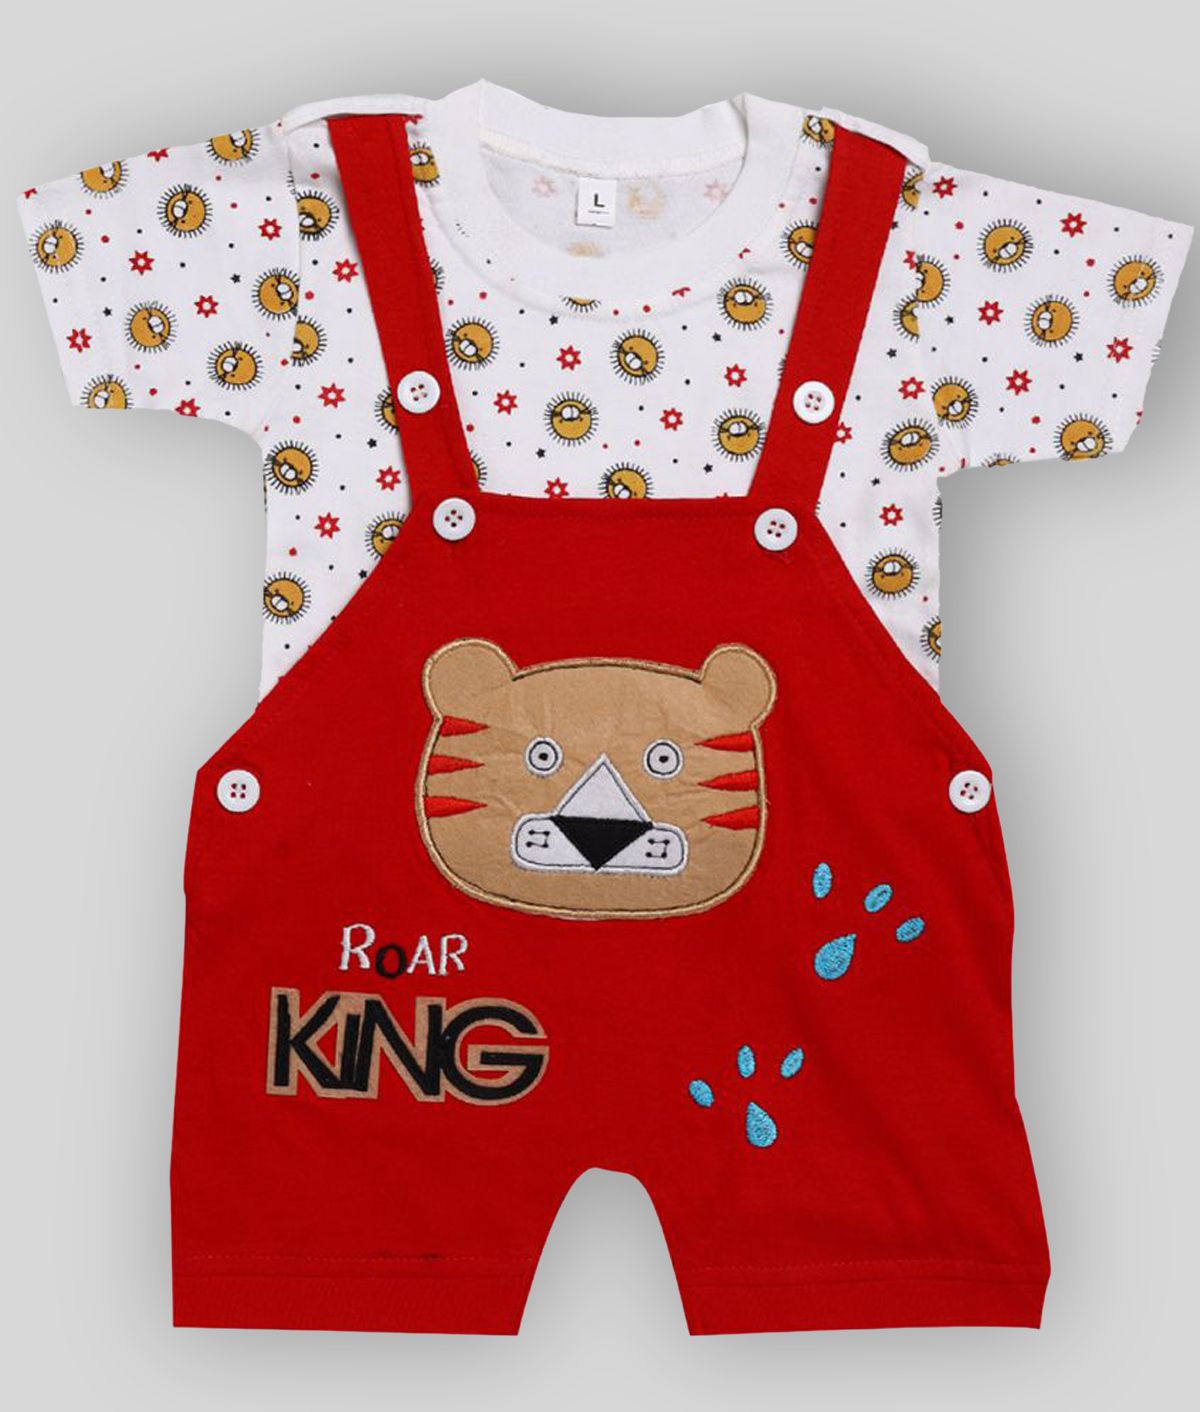 babeezworld dungaree for Boys & Girls casual printed pure cotton (Red & Blue; 9-12 Months)